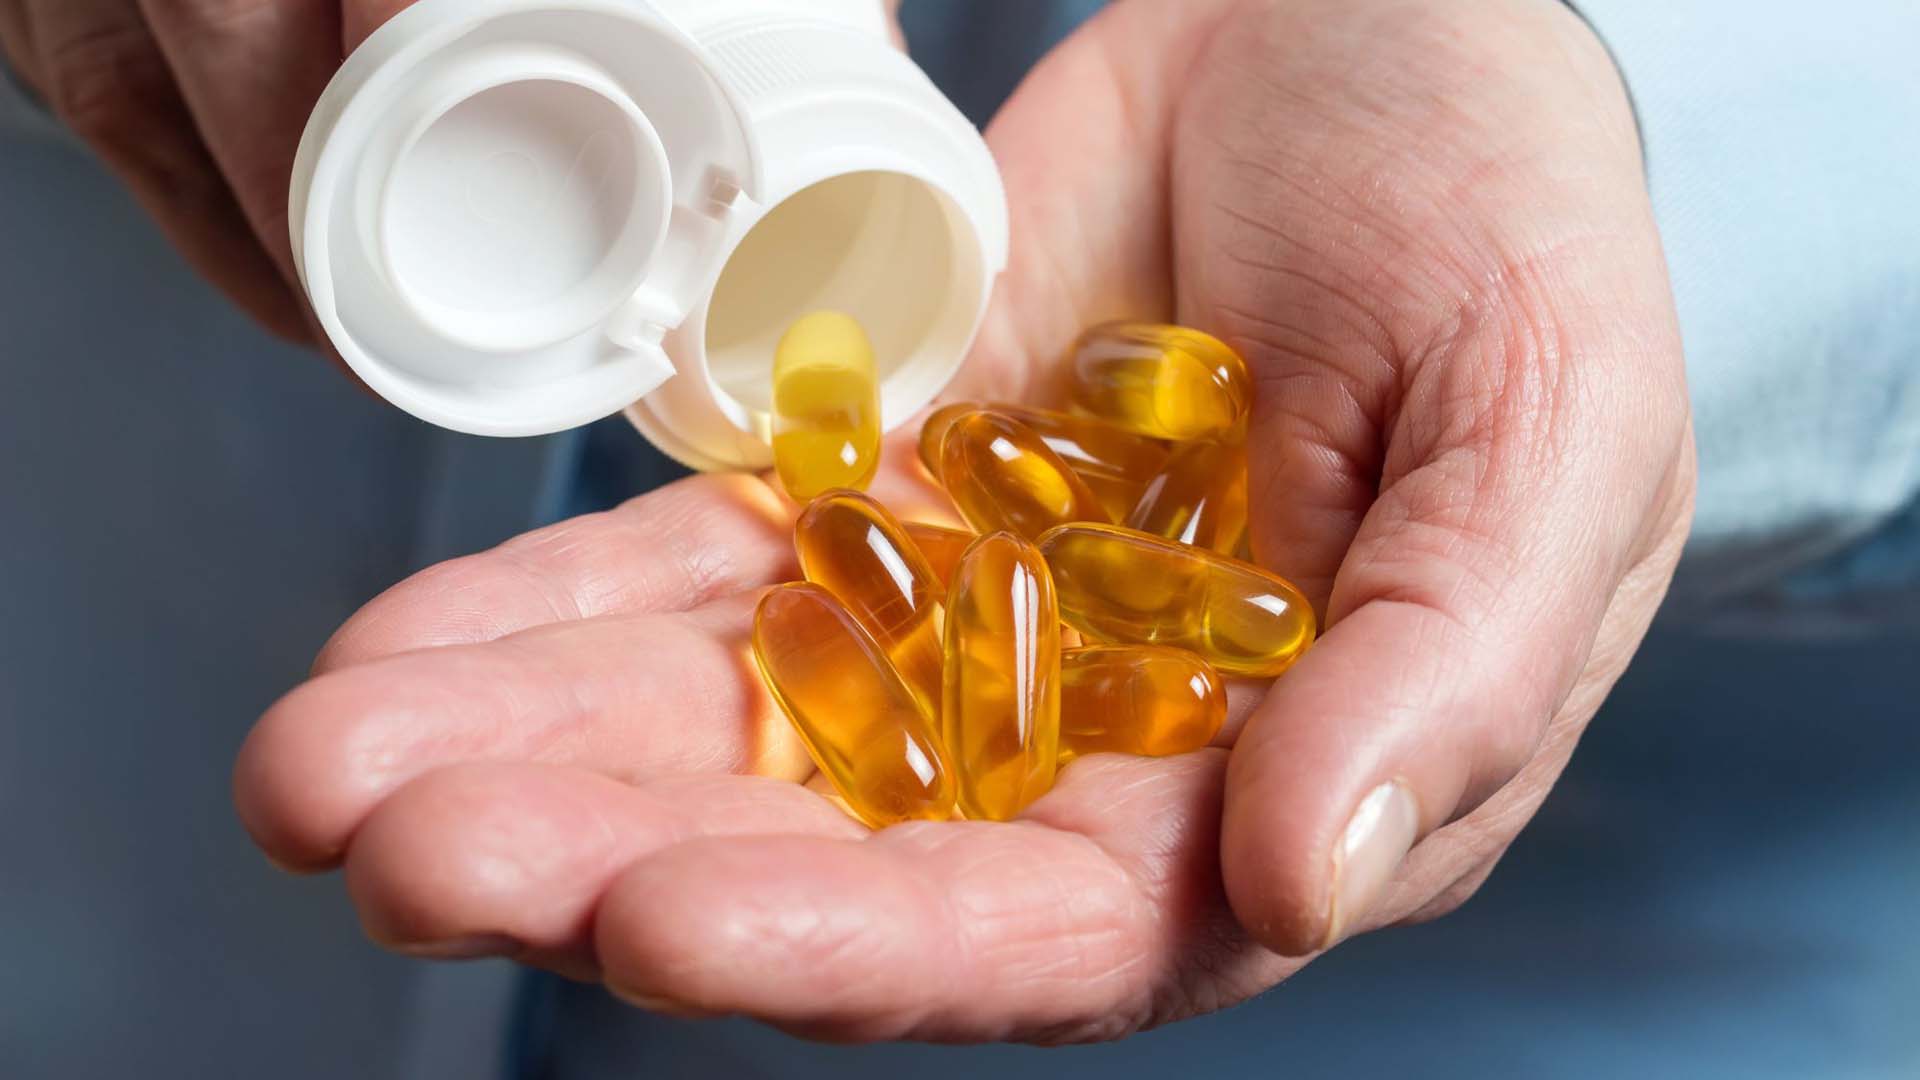 A woman putting Omega 3 supplement capsules into her hand